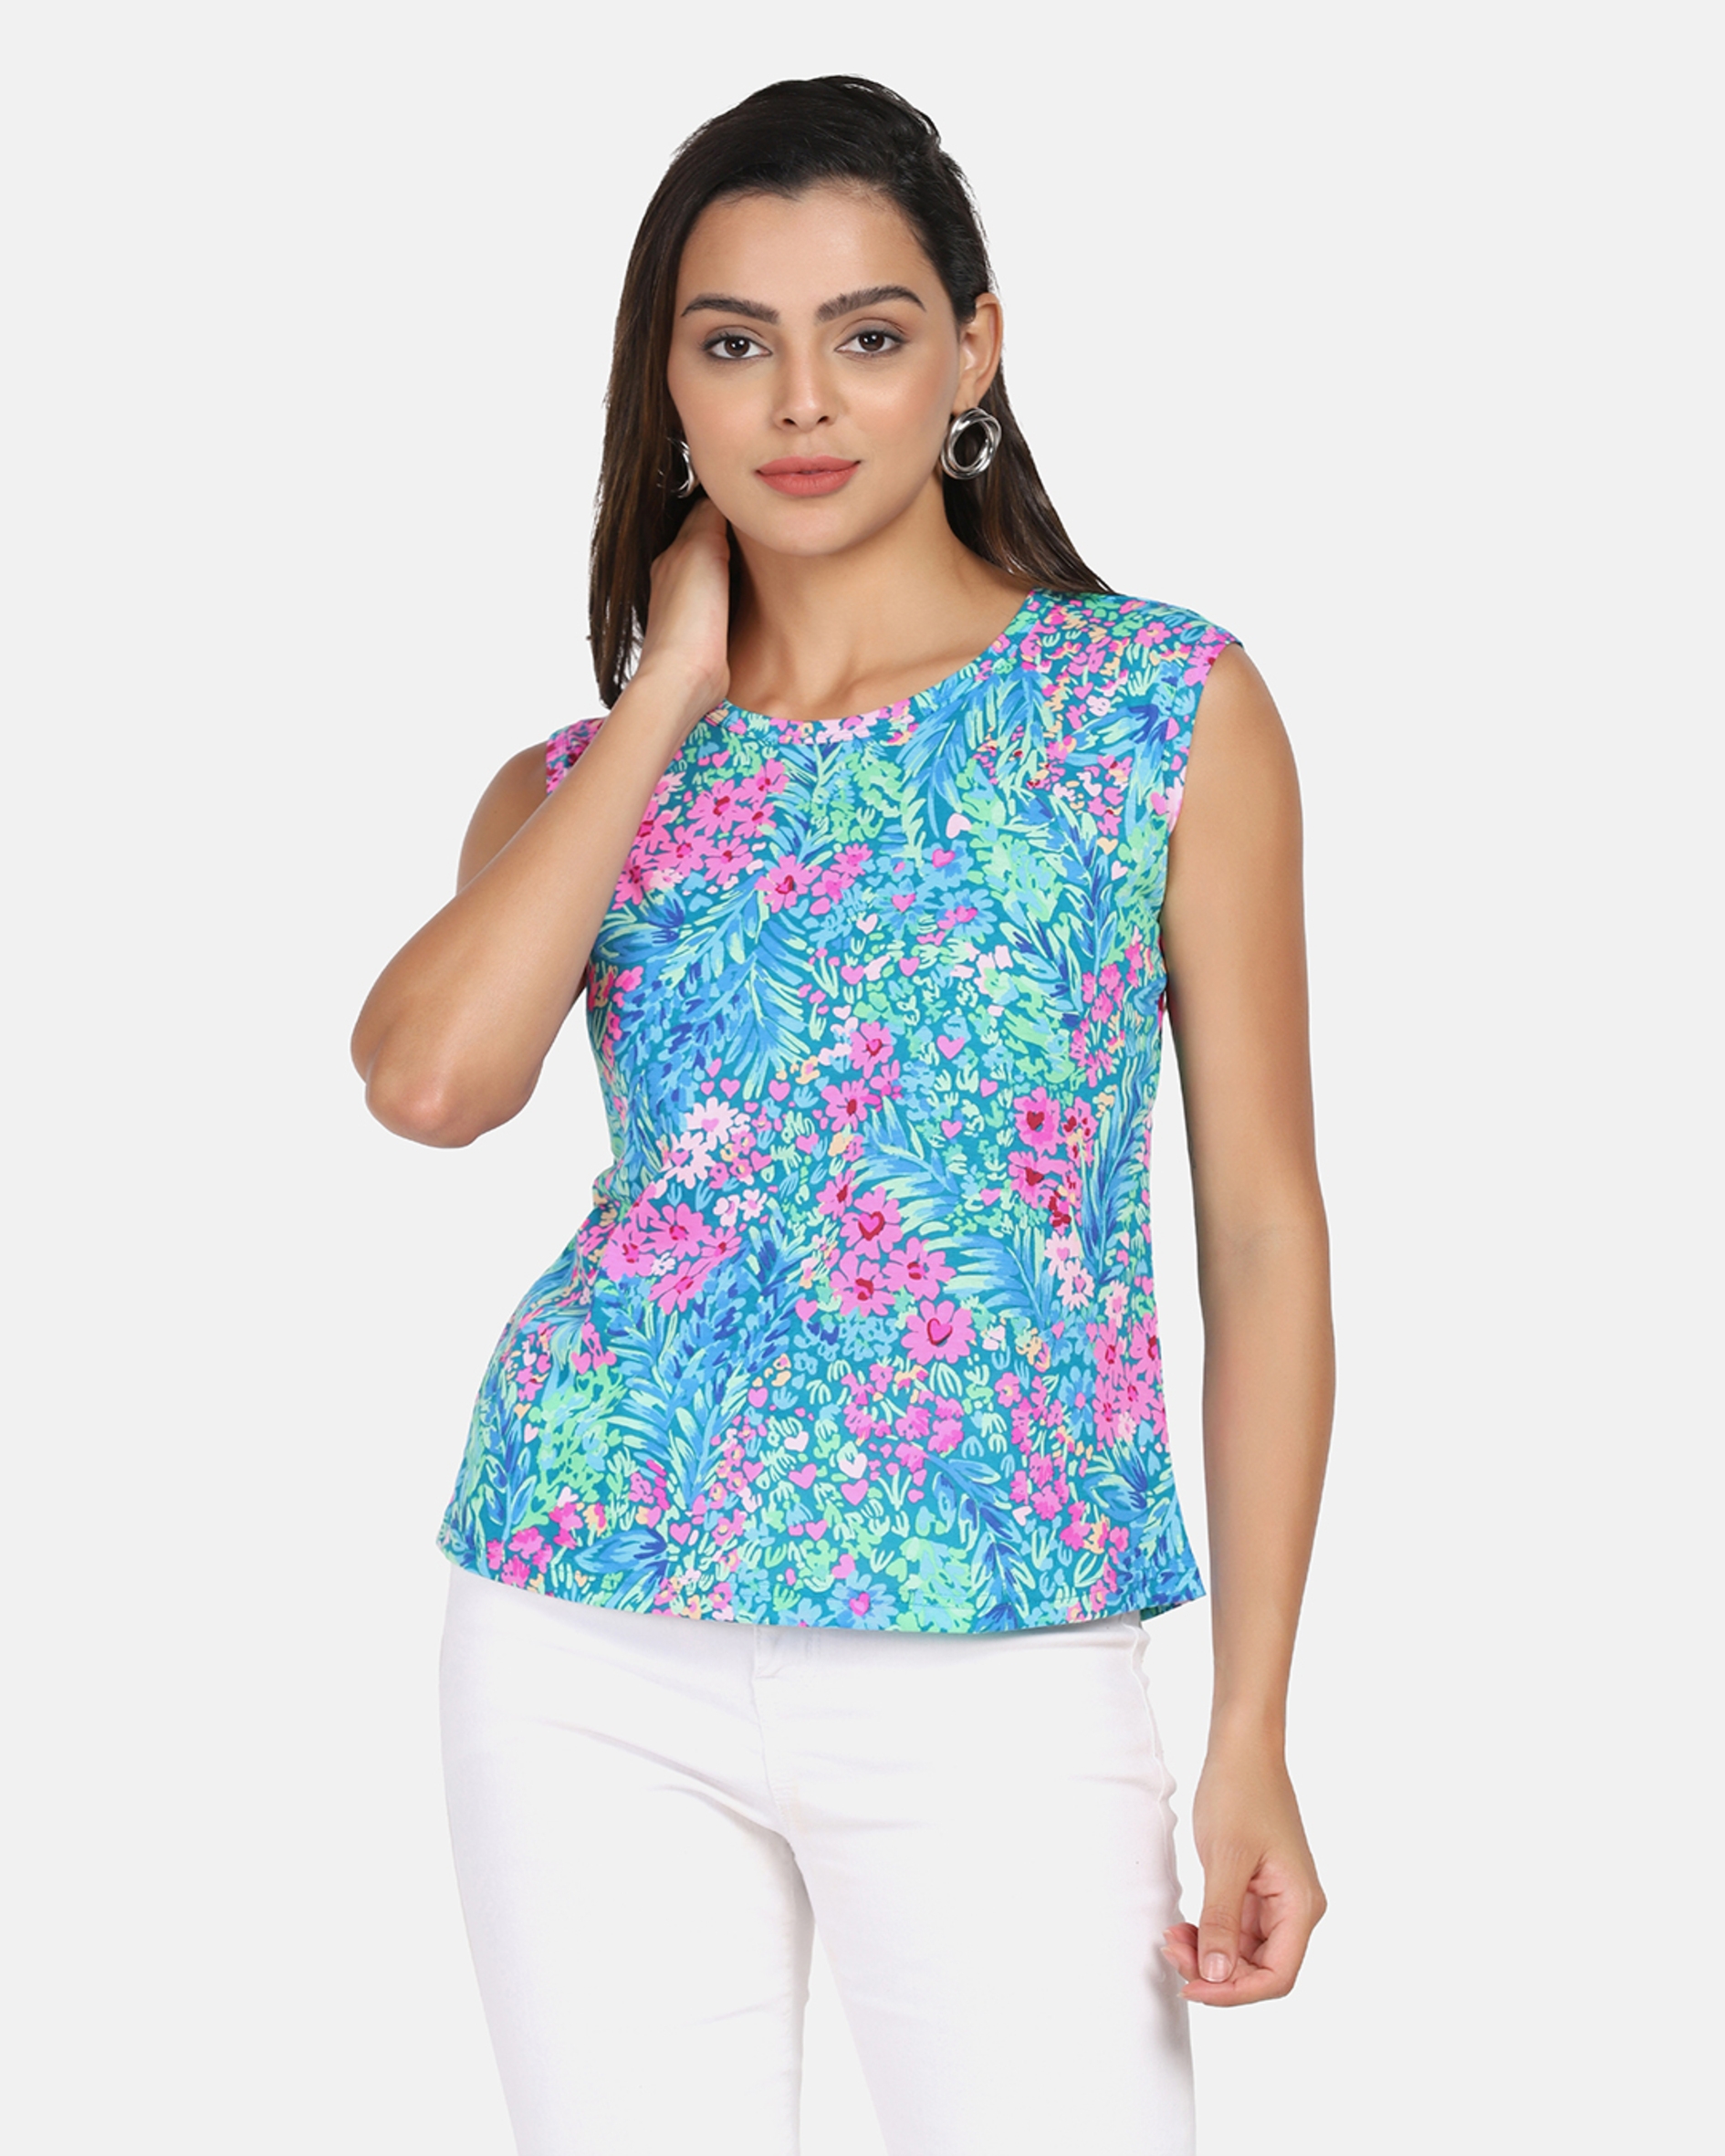 Inands | Abstract Printed Supima Cotton Sky Blue & Pink Top undefined